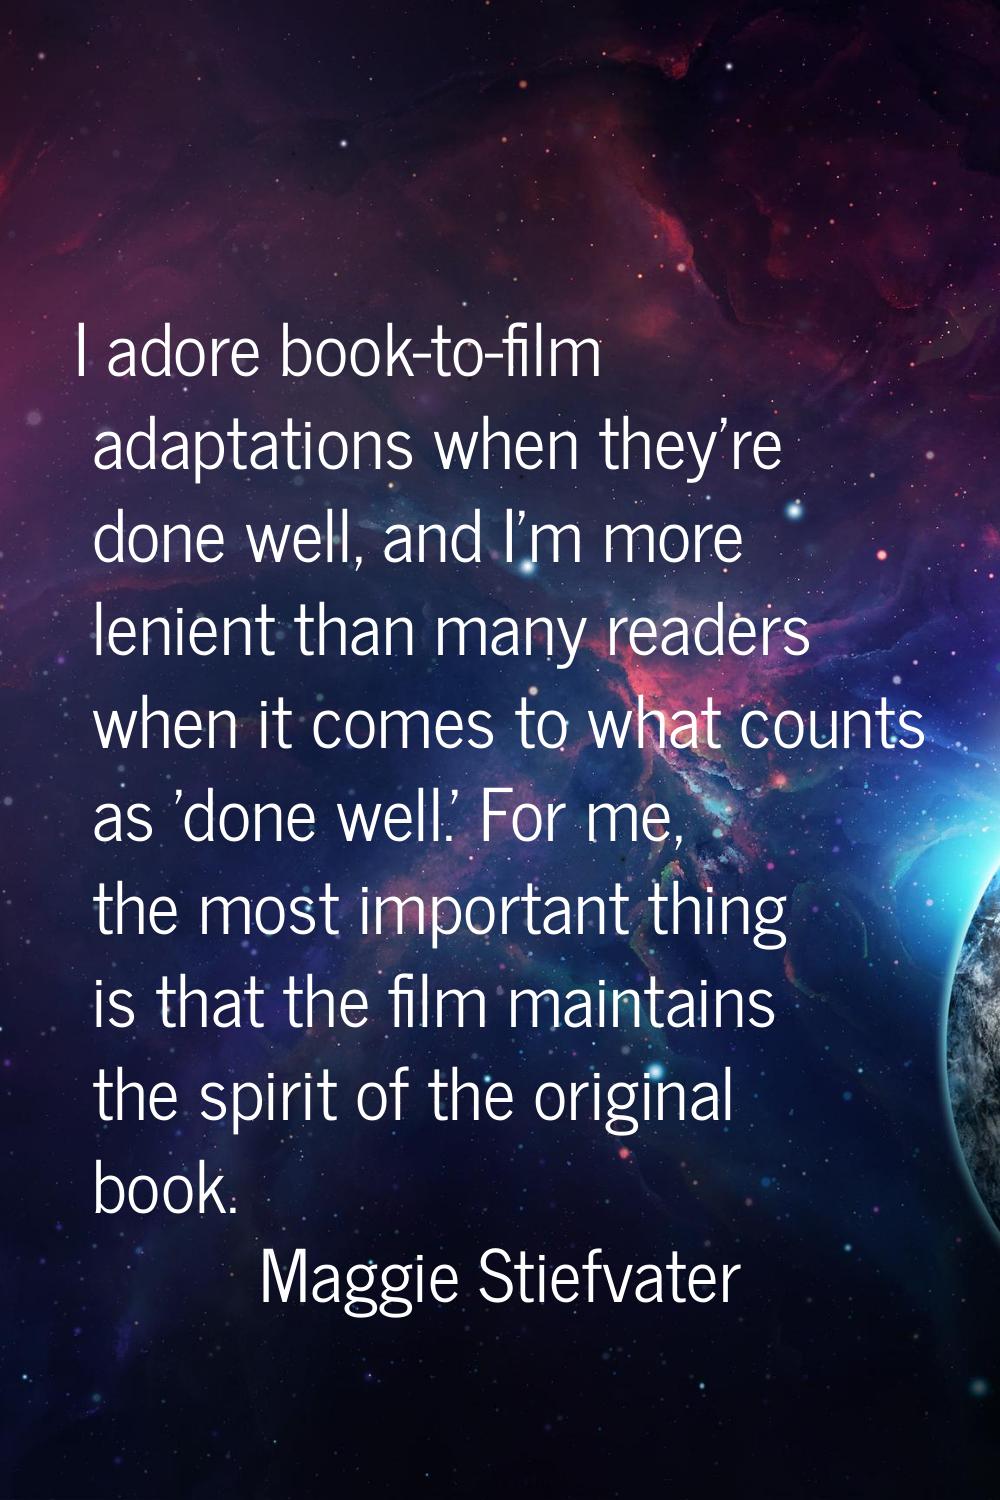 I adore book-to-film adaptations when they're done well, and I'm more lenient than many readers whe